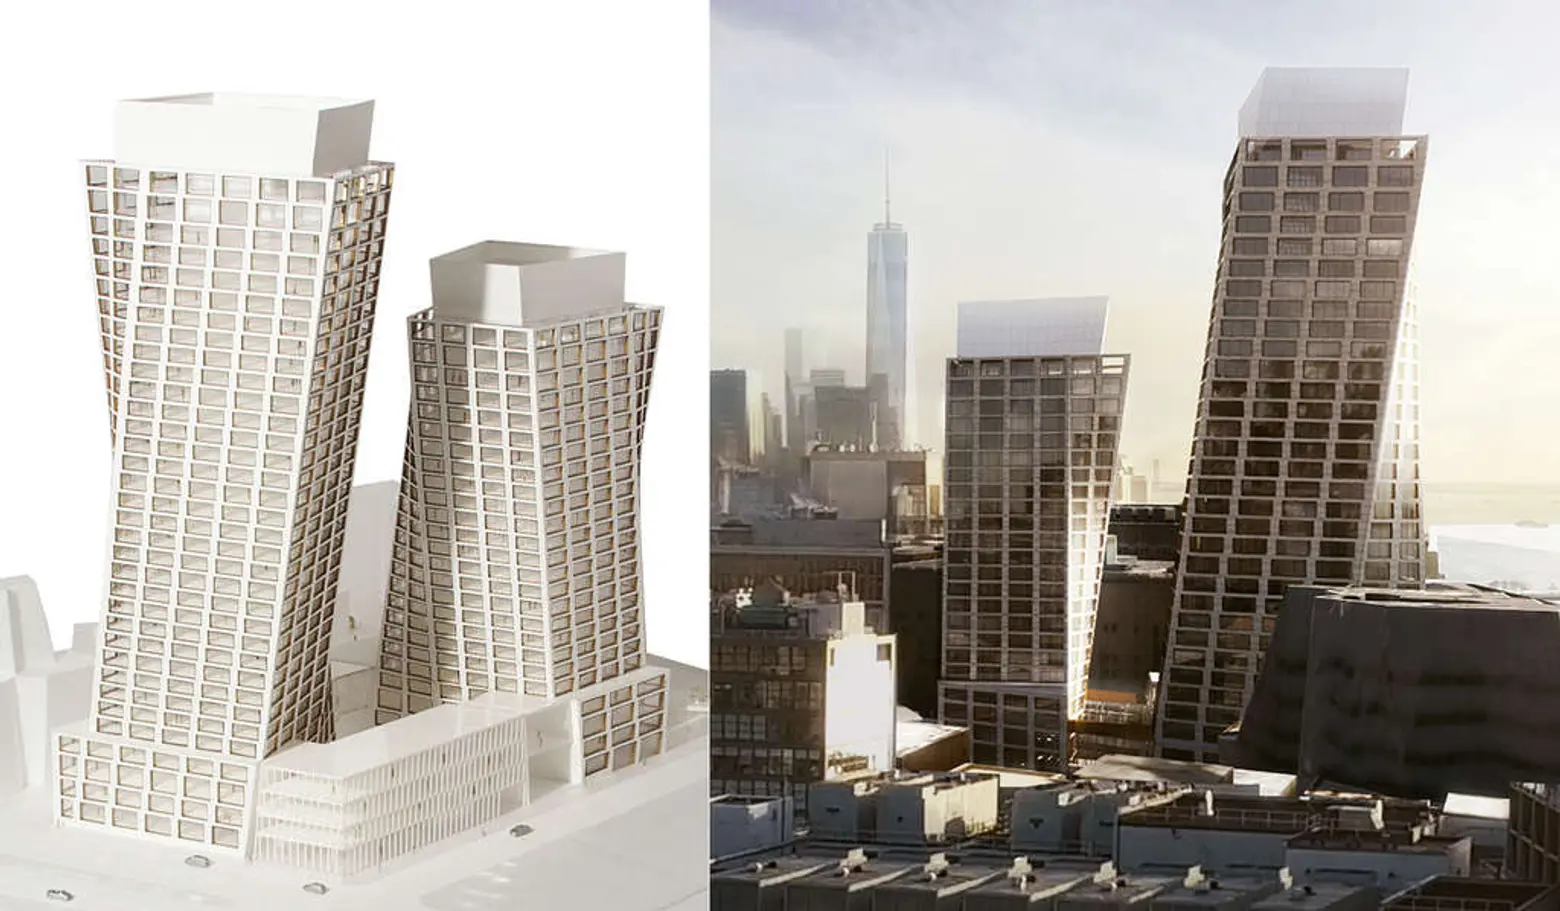 Bjarke Ingels’ ‘bold yet graceful’ High Line towers get new website and flashy signage